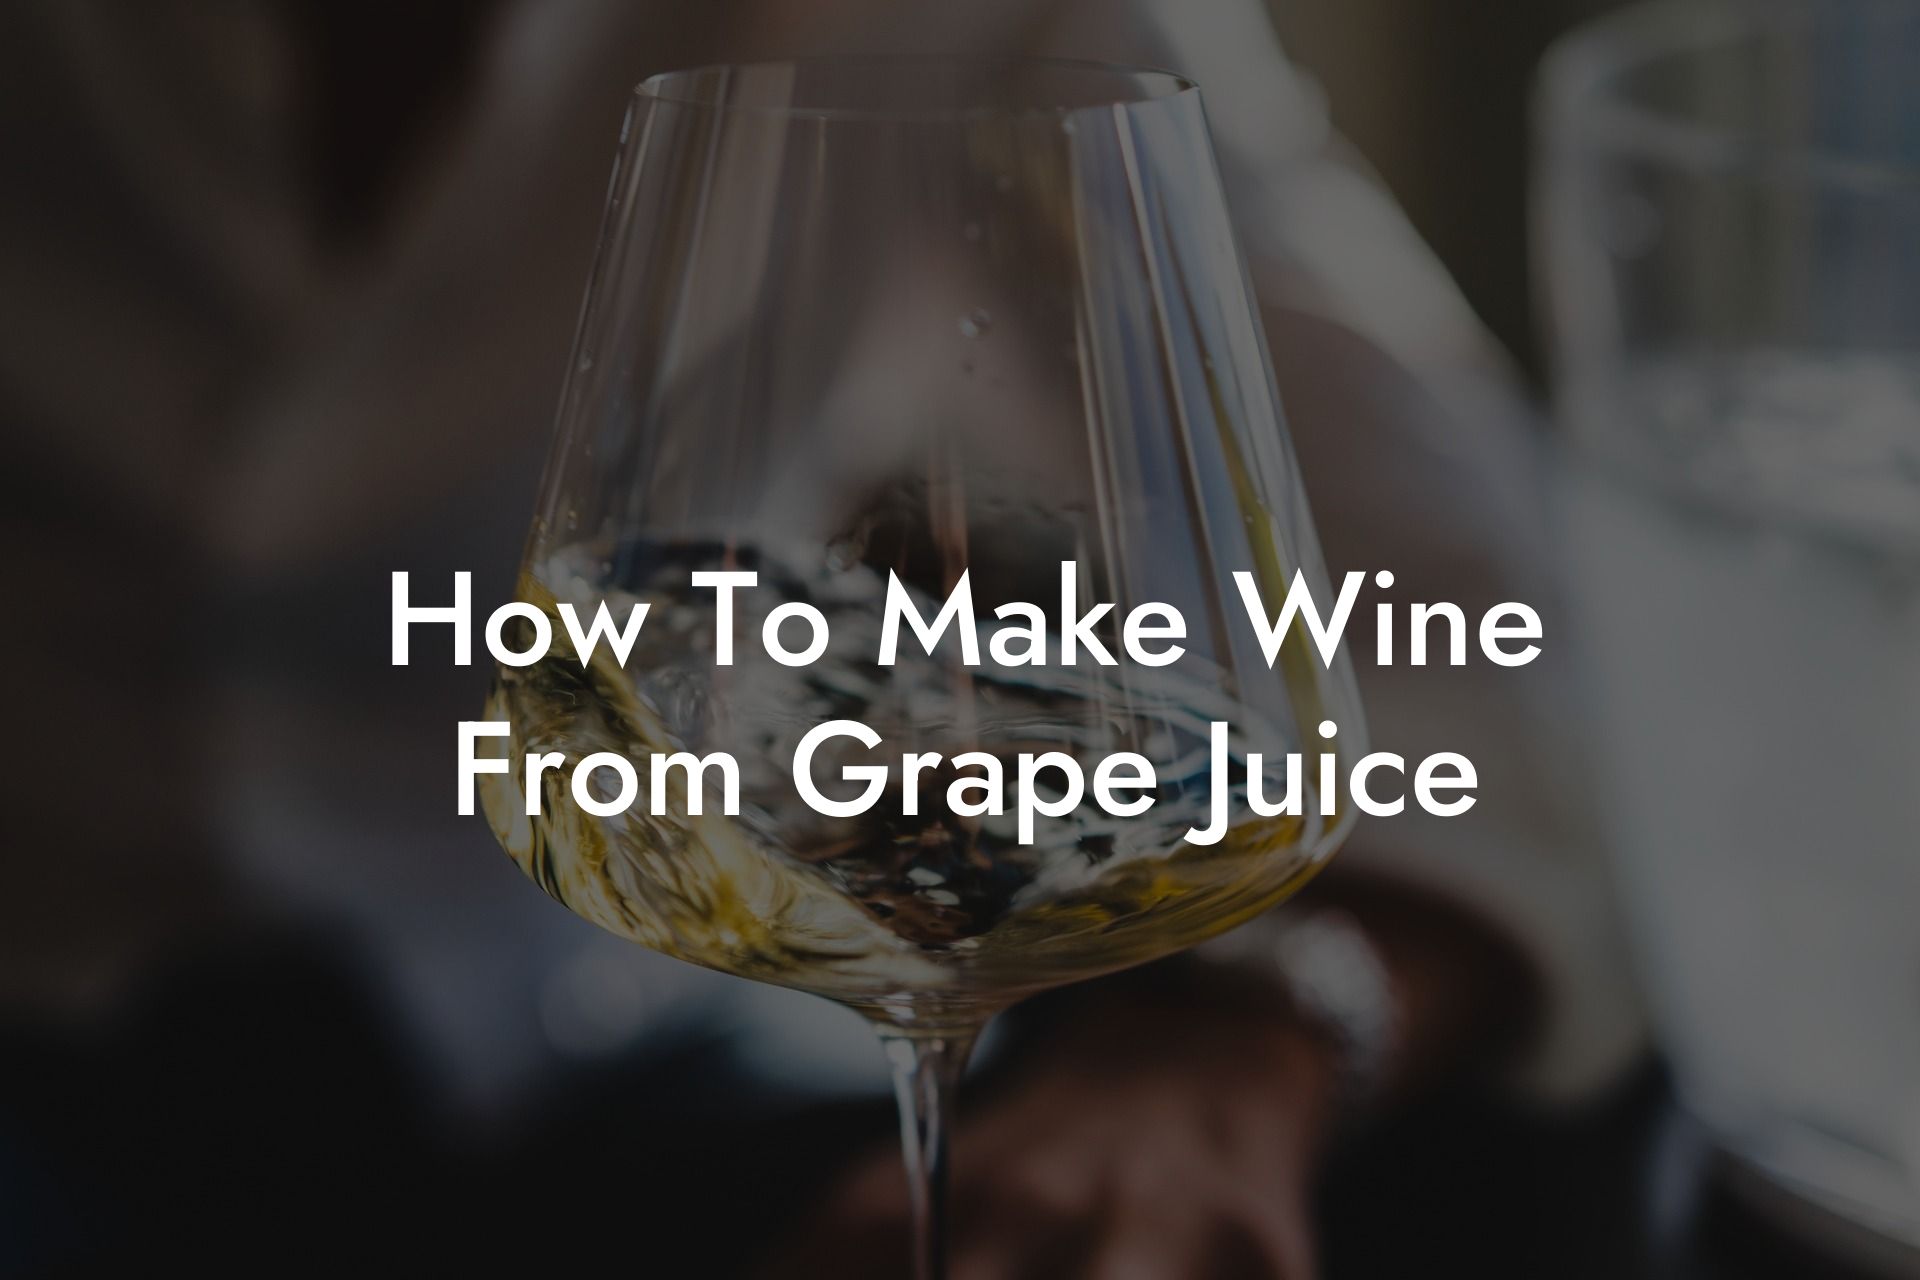 How To Make Wine From Grape Juice